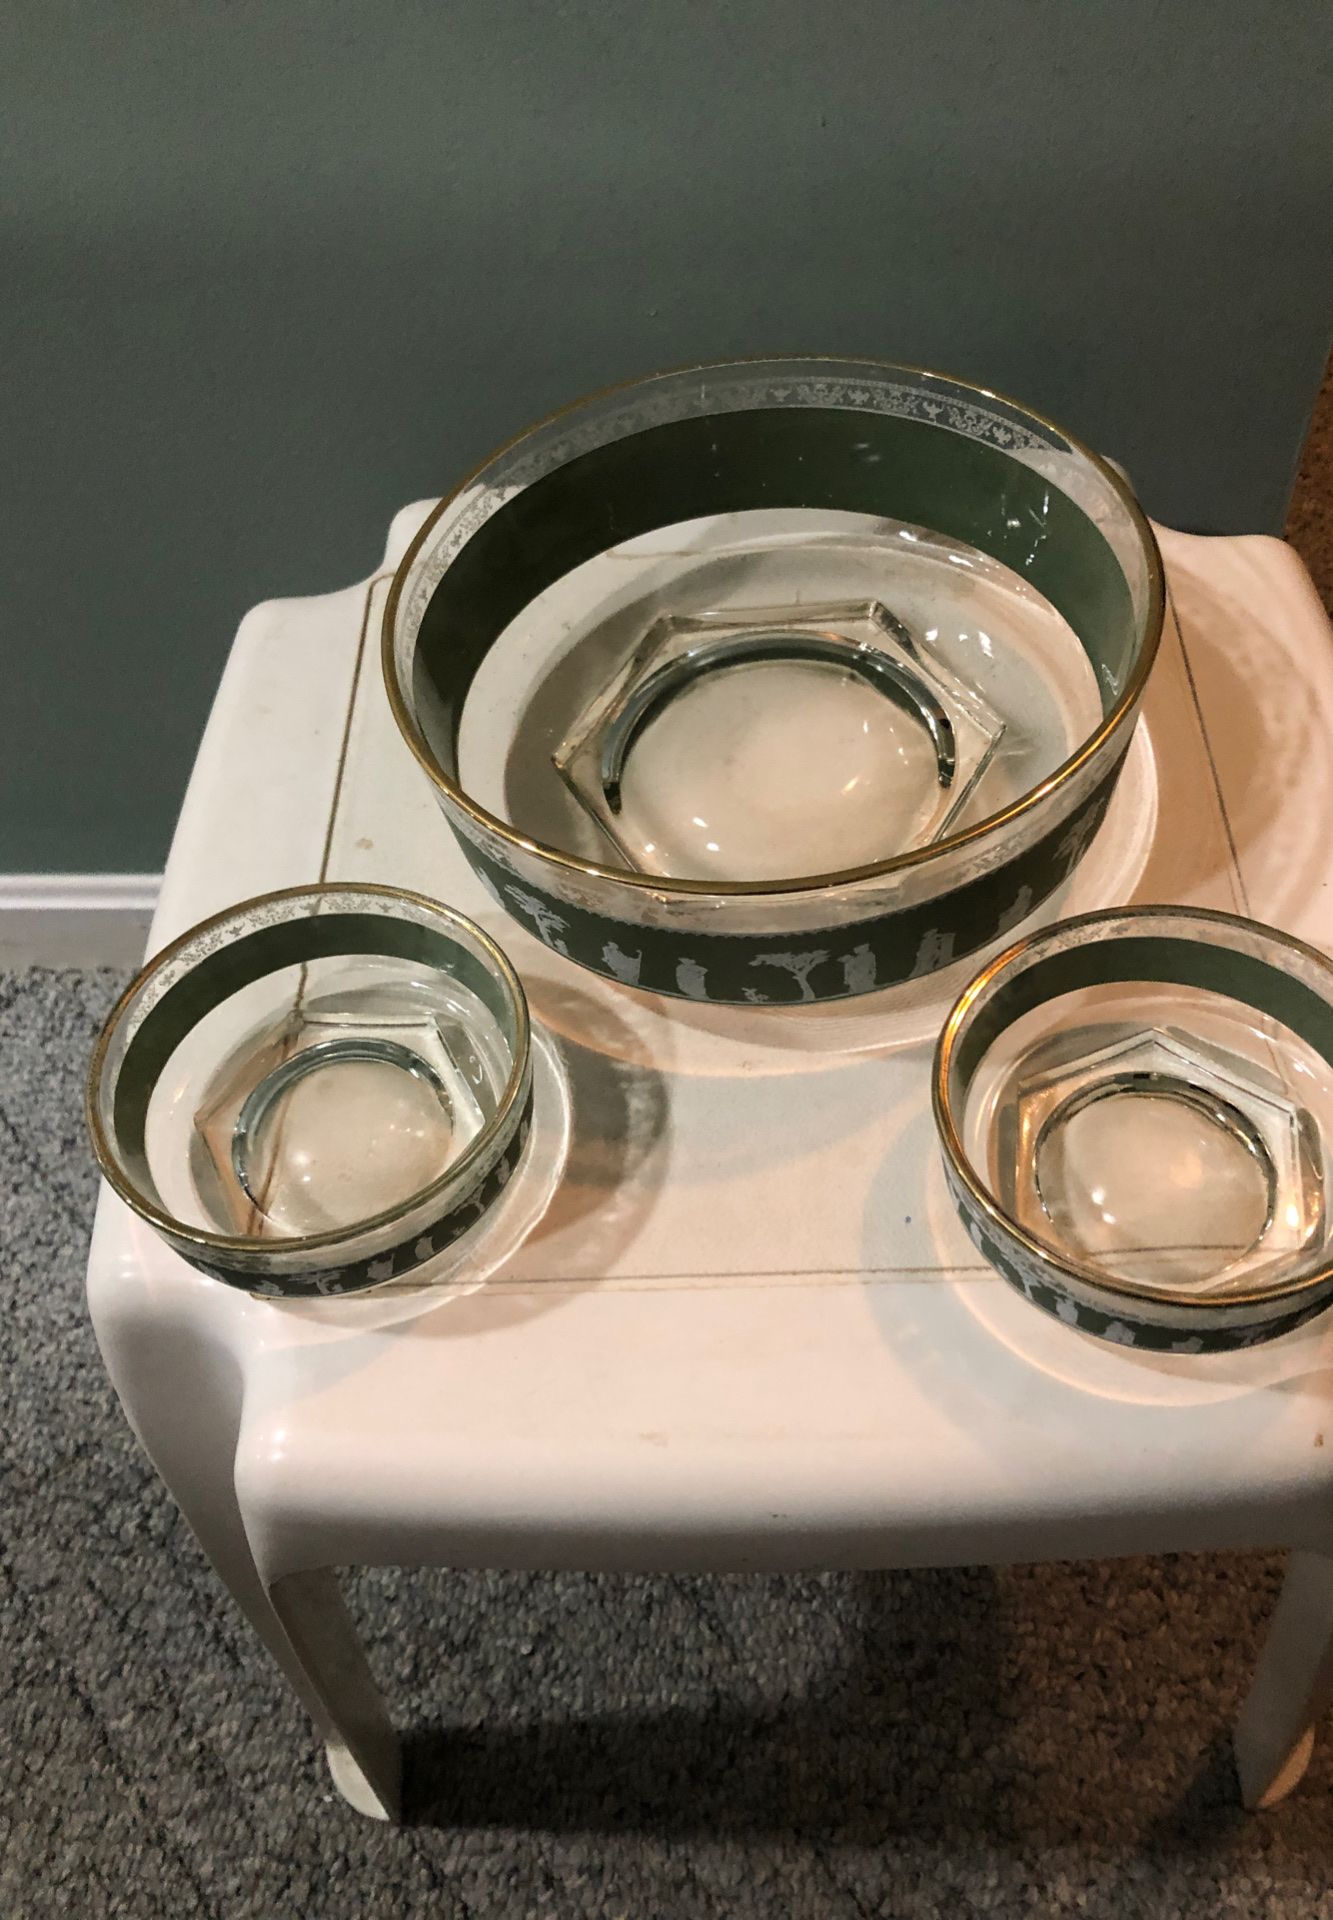 Bowl with 2 side bowls - great for chips and dip- new $10